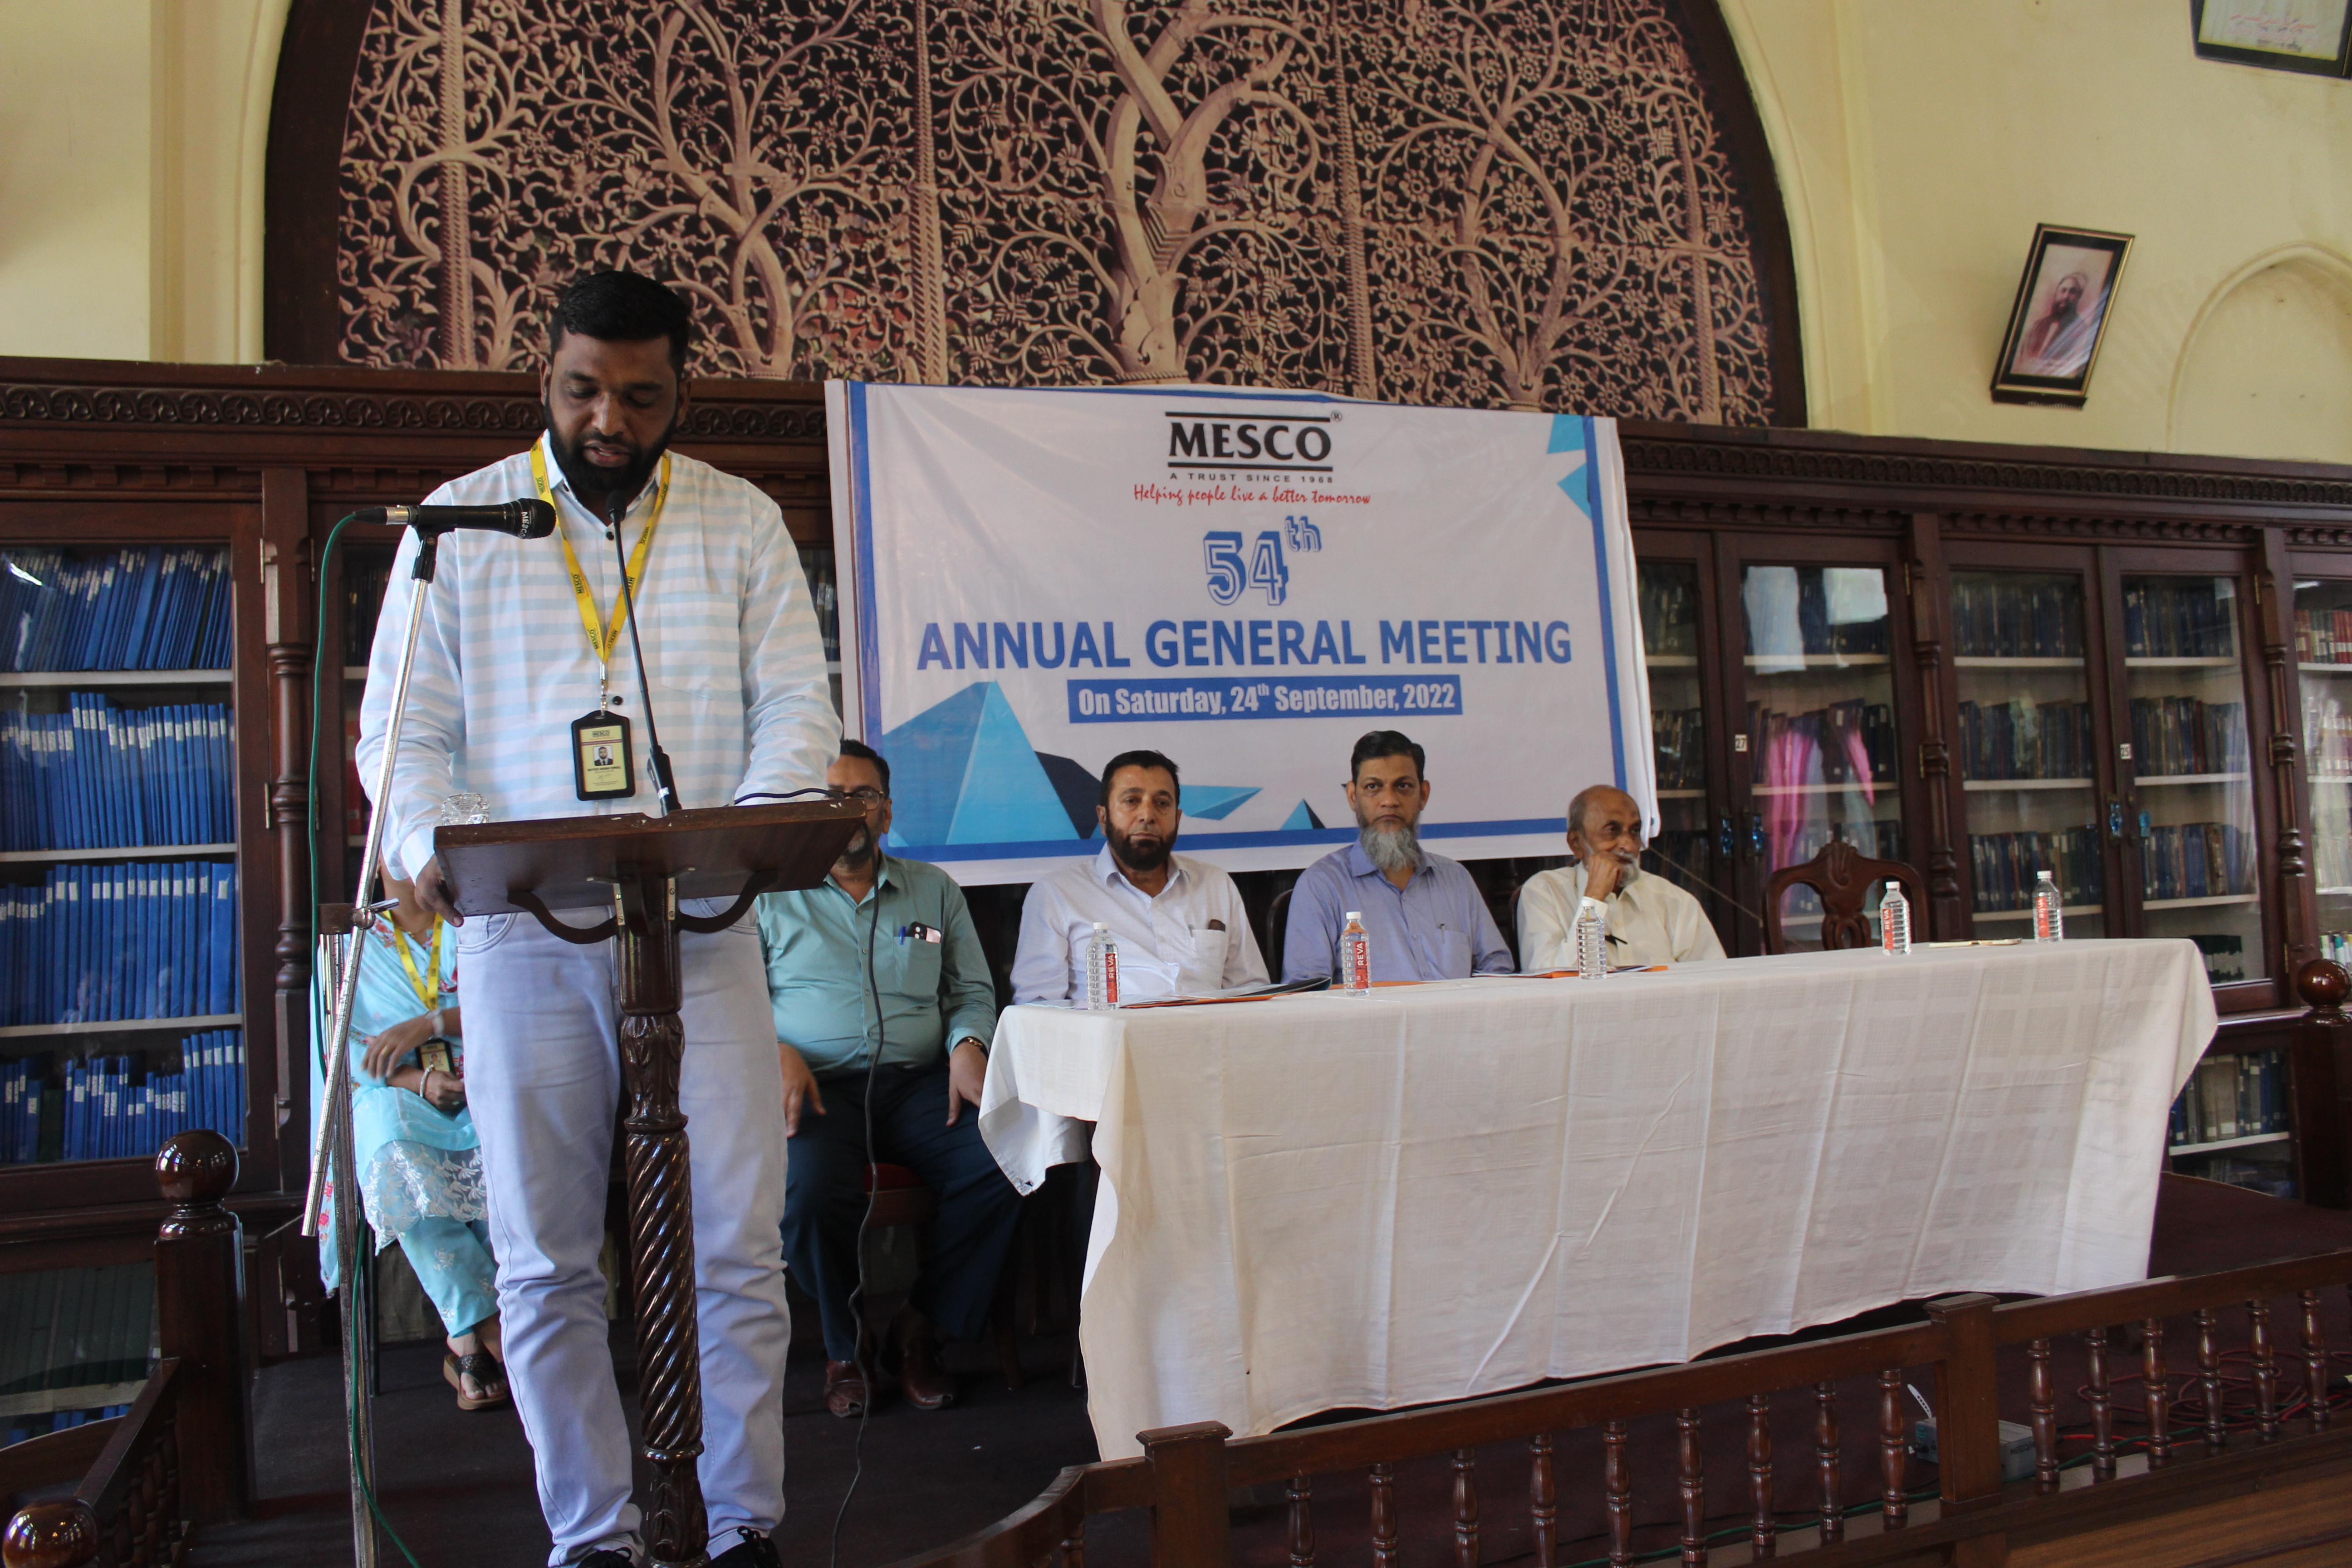 52nd Annual General Meeting